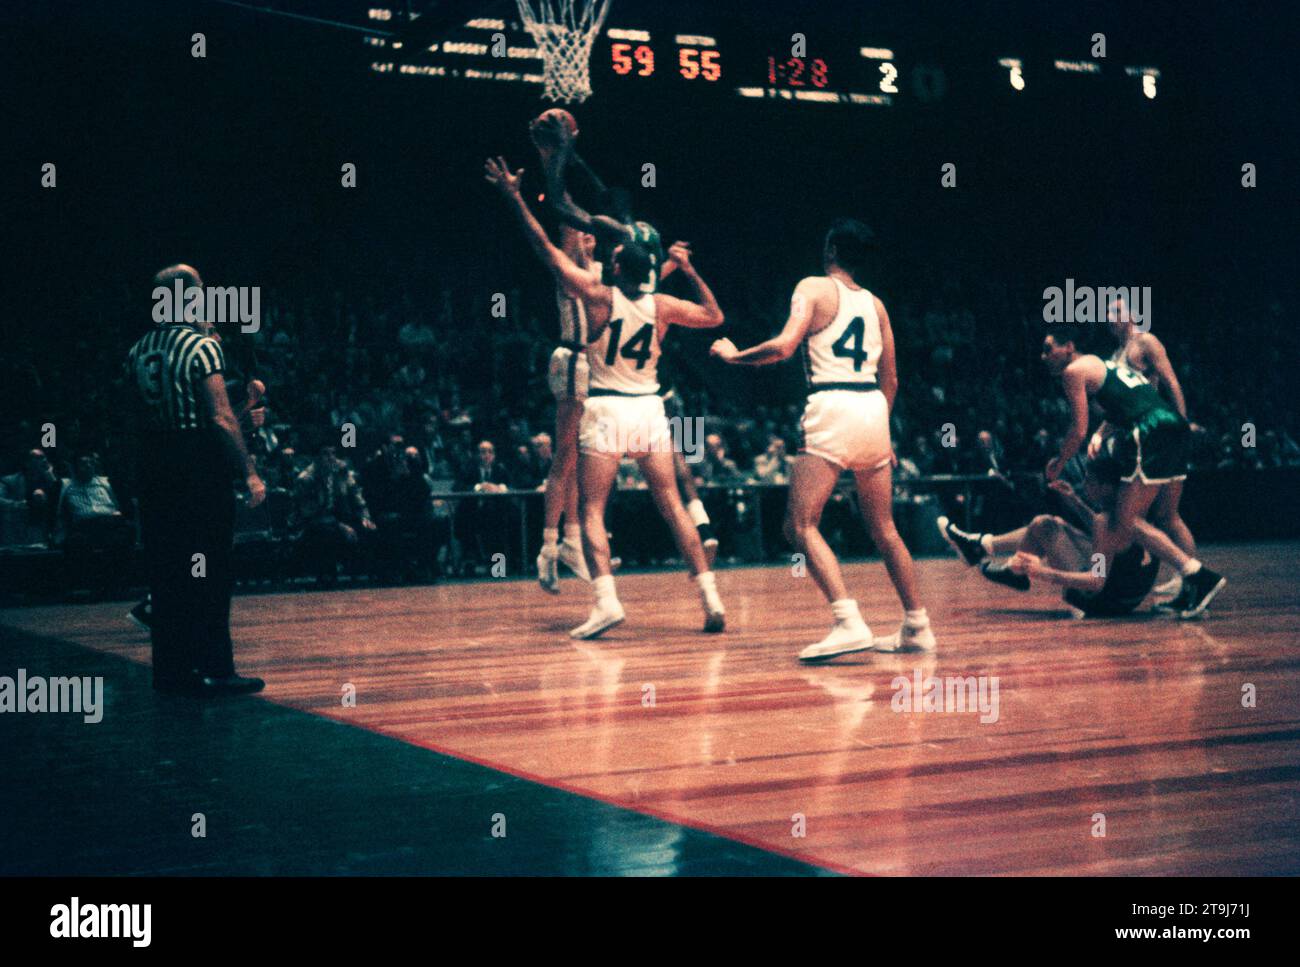 NEW YORK, NY - OCTOBER 25: Bill Russell #6 of the Boston Celtics grabs the rebound as Kenny Sears #12 and Charlie Tyra #14 of the New York Knicks defend during an NBA game on October 25, 1958 at the Madison Square Garden in New York, New York.  (Photo by Hy Peskin) *** Local Caption *** Bill Russell;Kenny Sears;Charlie Tyra Stock Photo